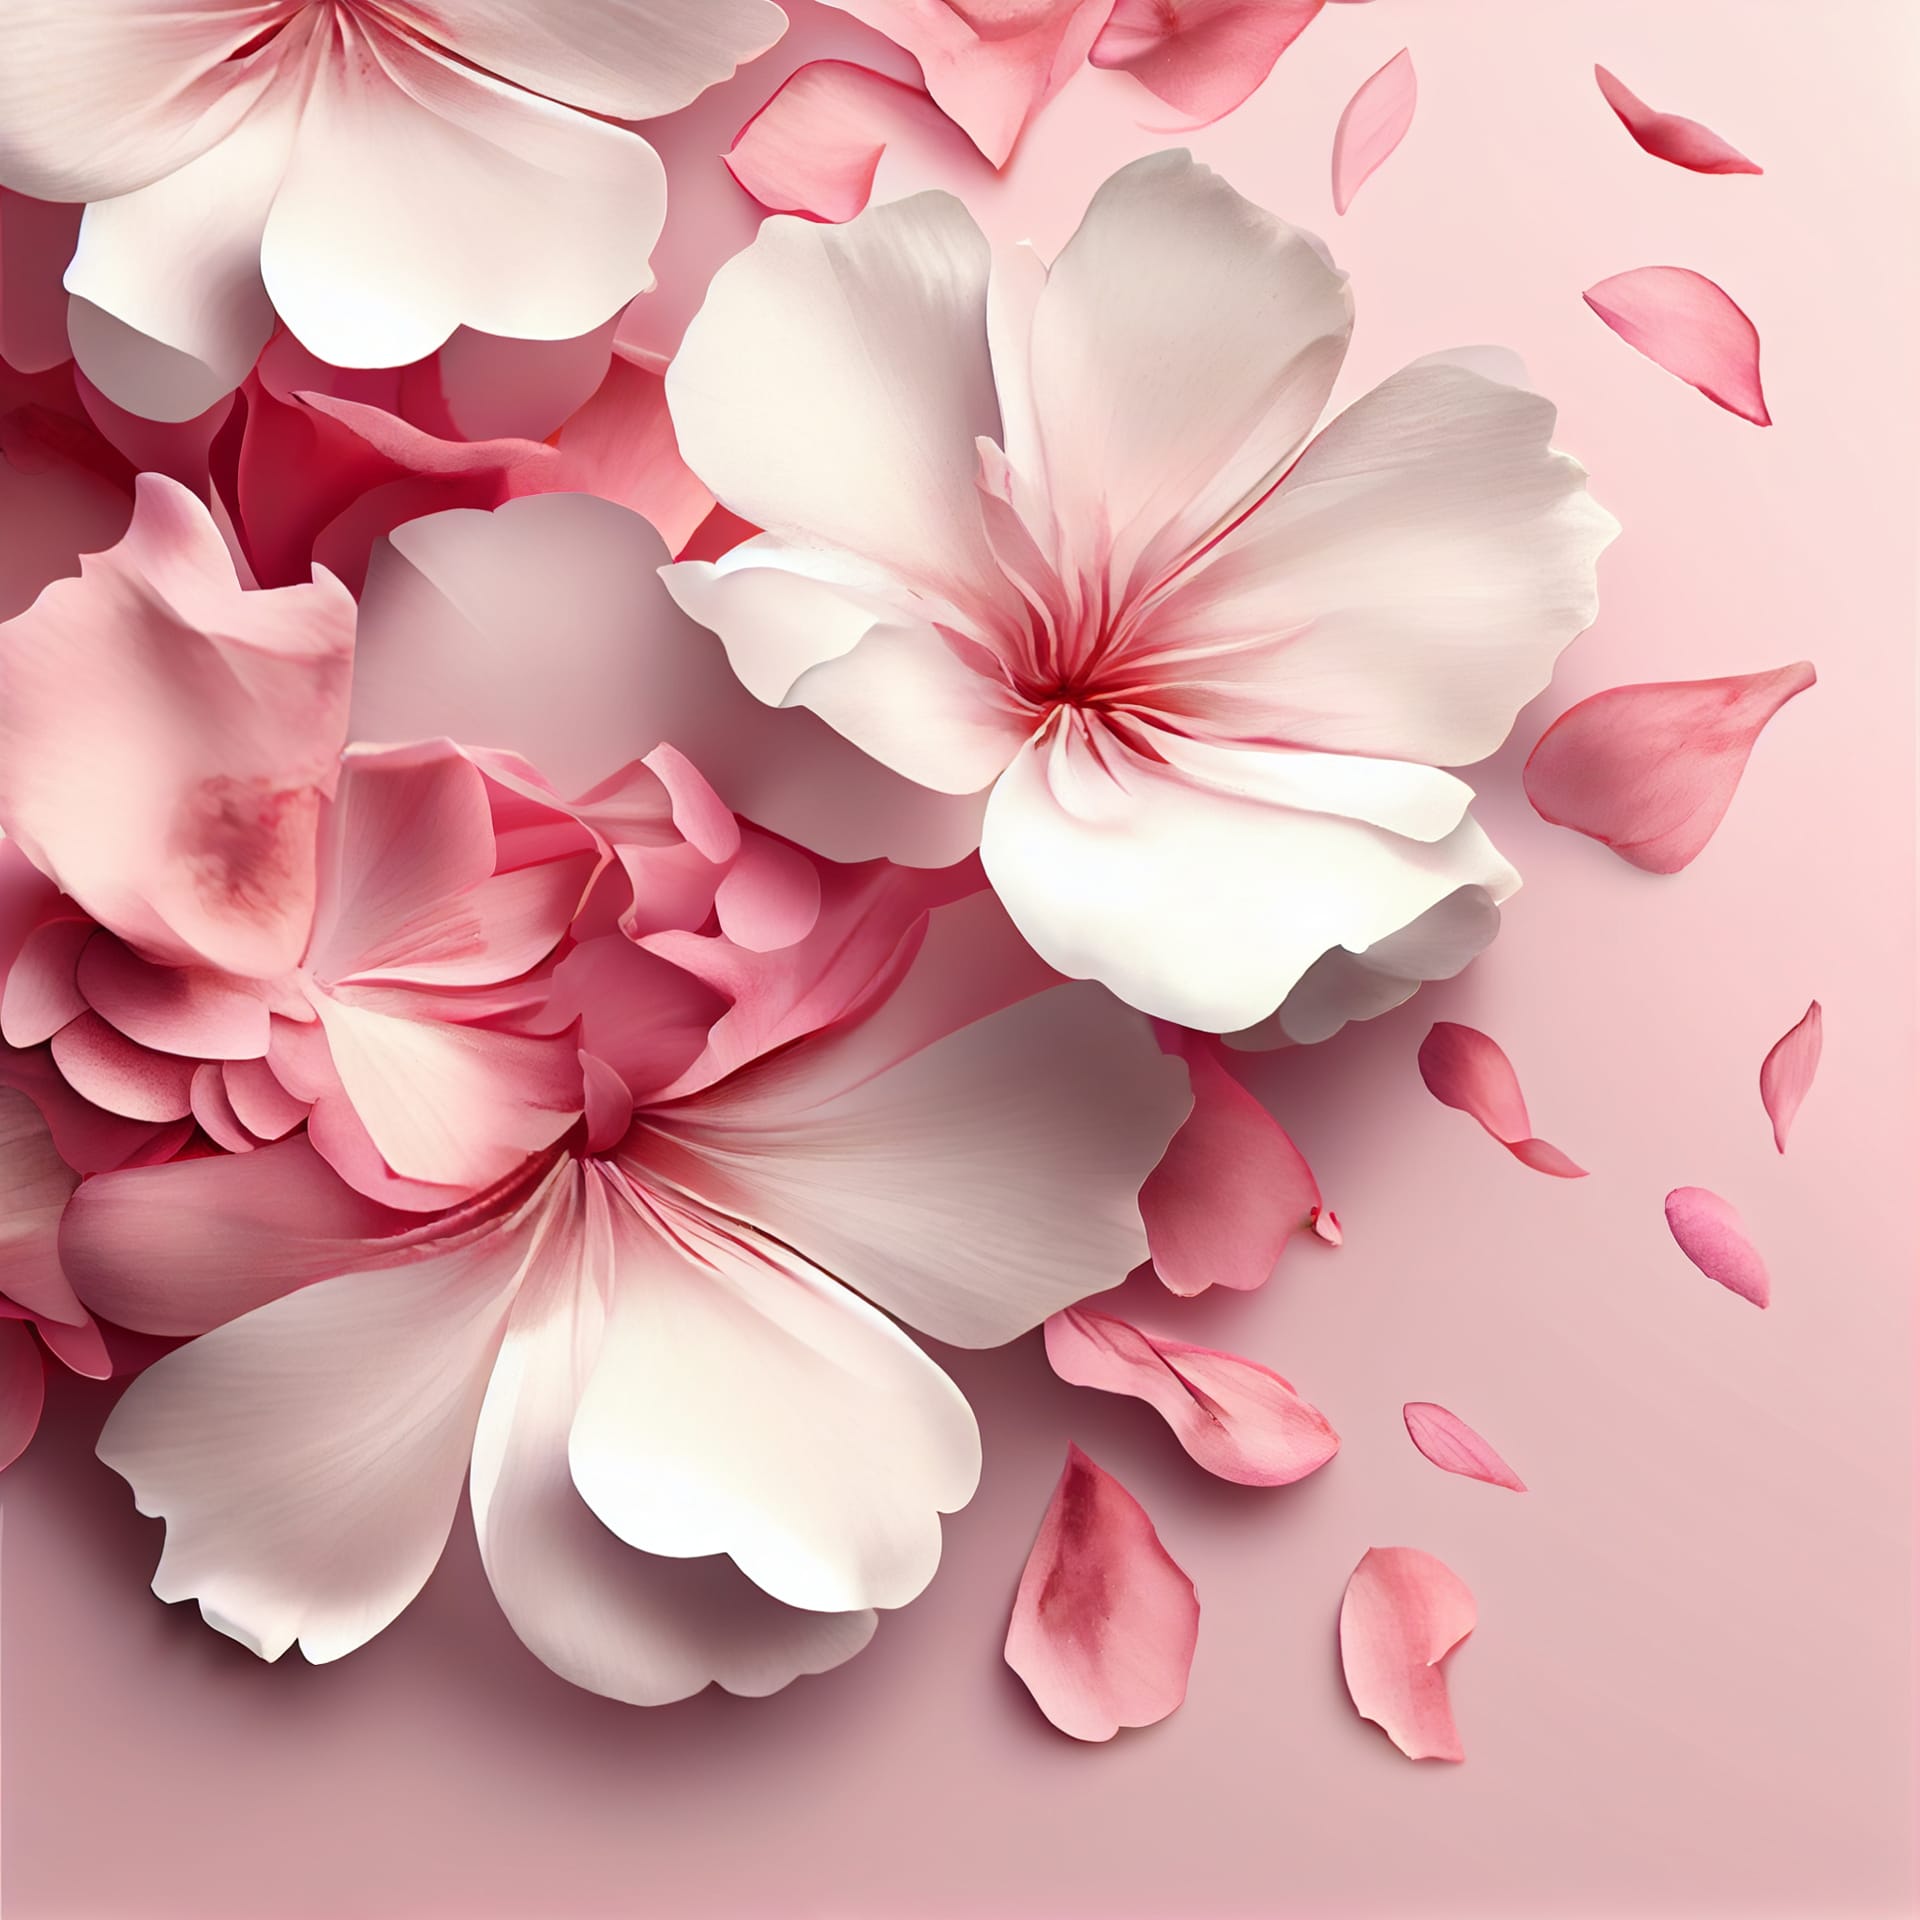 Cherry blossom sakura pink flowers petals floral pink profile picture